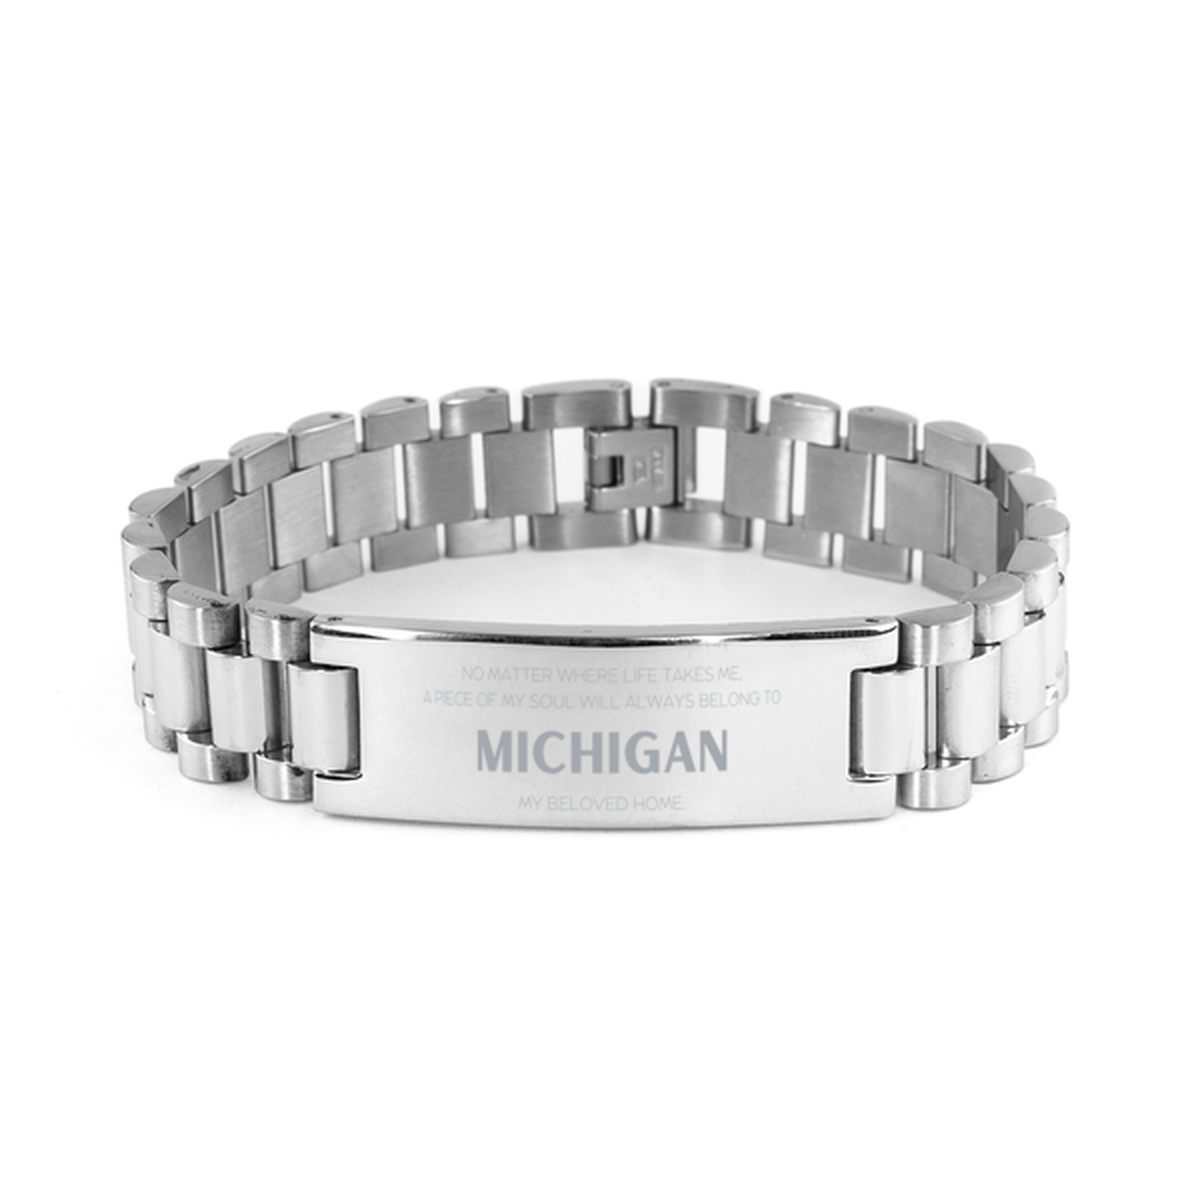 Love Michigan State Gifts, My soul will always belong to Michigan, Proud Ladder Stainless Steel Bracelet, Birthday Unique Gifts For Michigan Men, Women, Friends